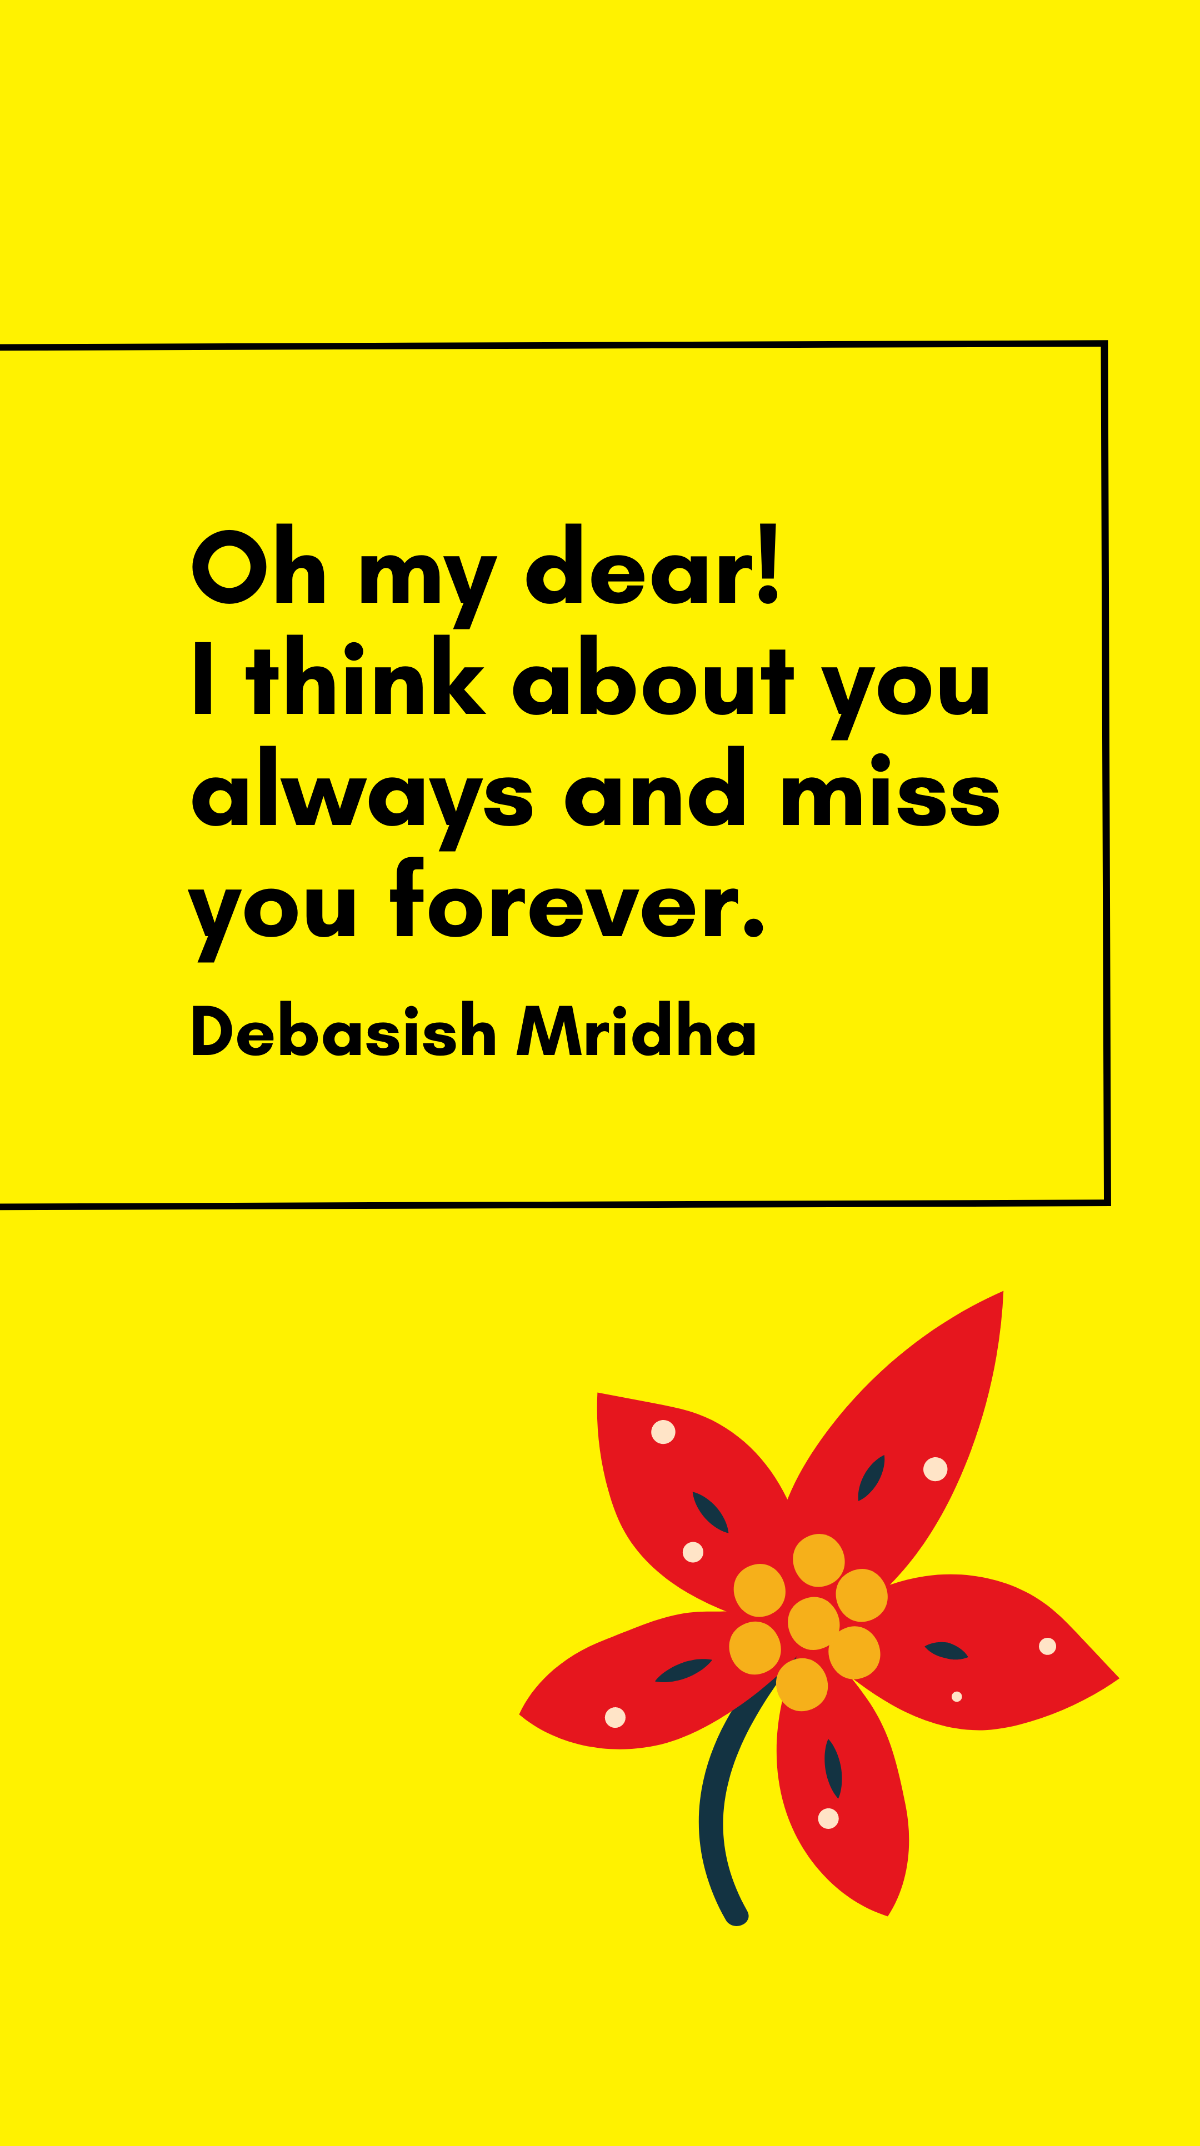 Debasish Mridha - Oh my dear! I think about you always and miss you forever. Template